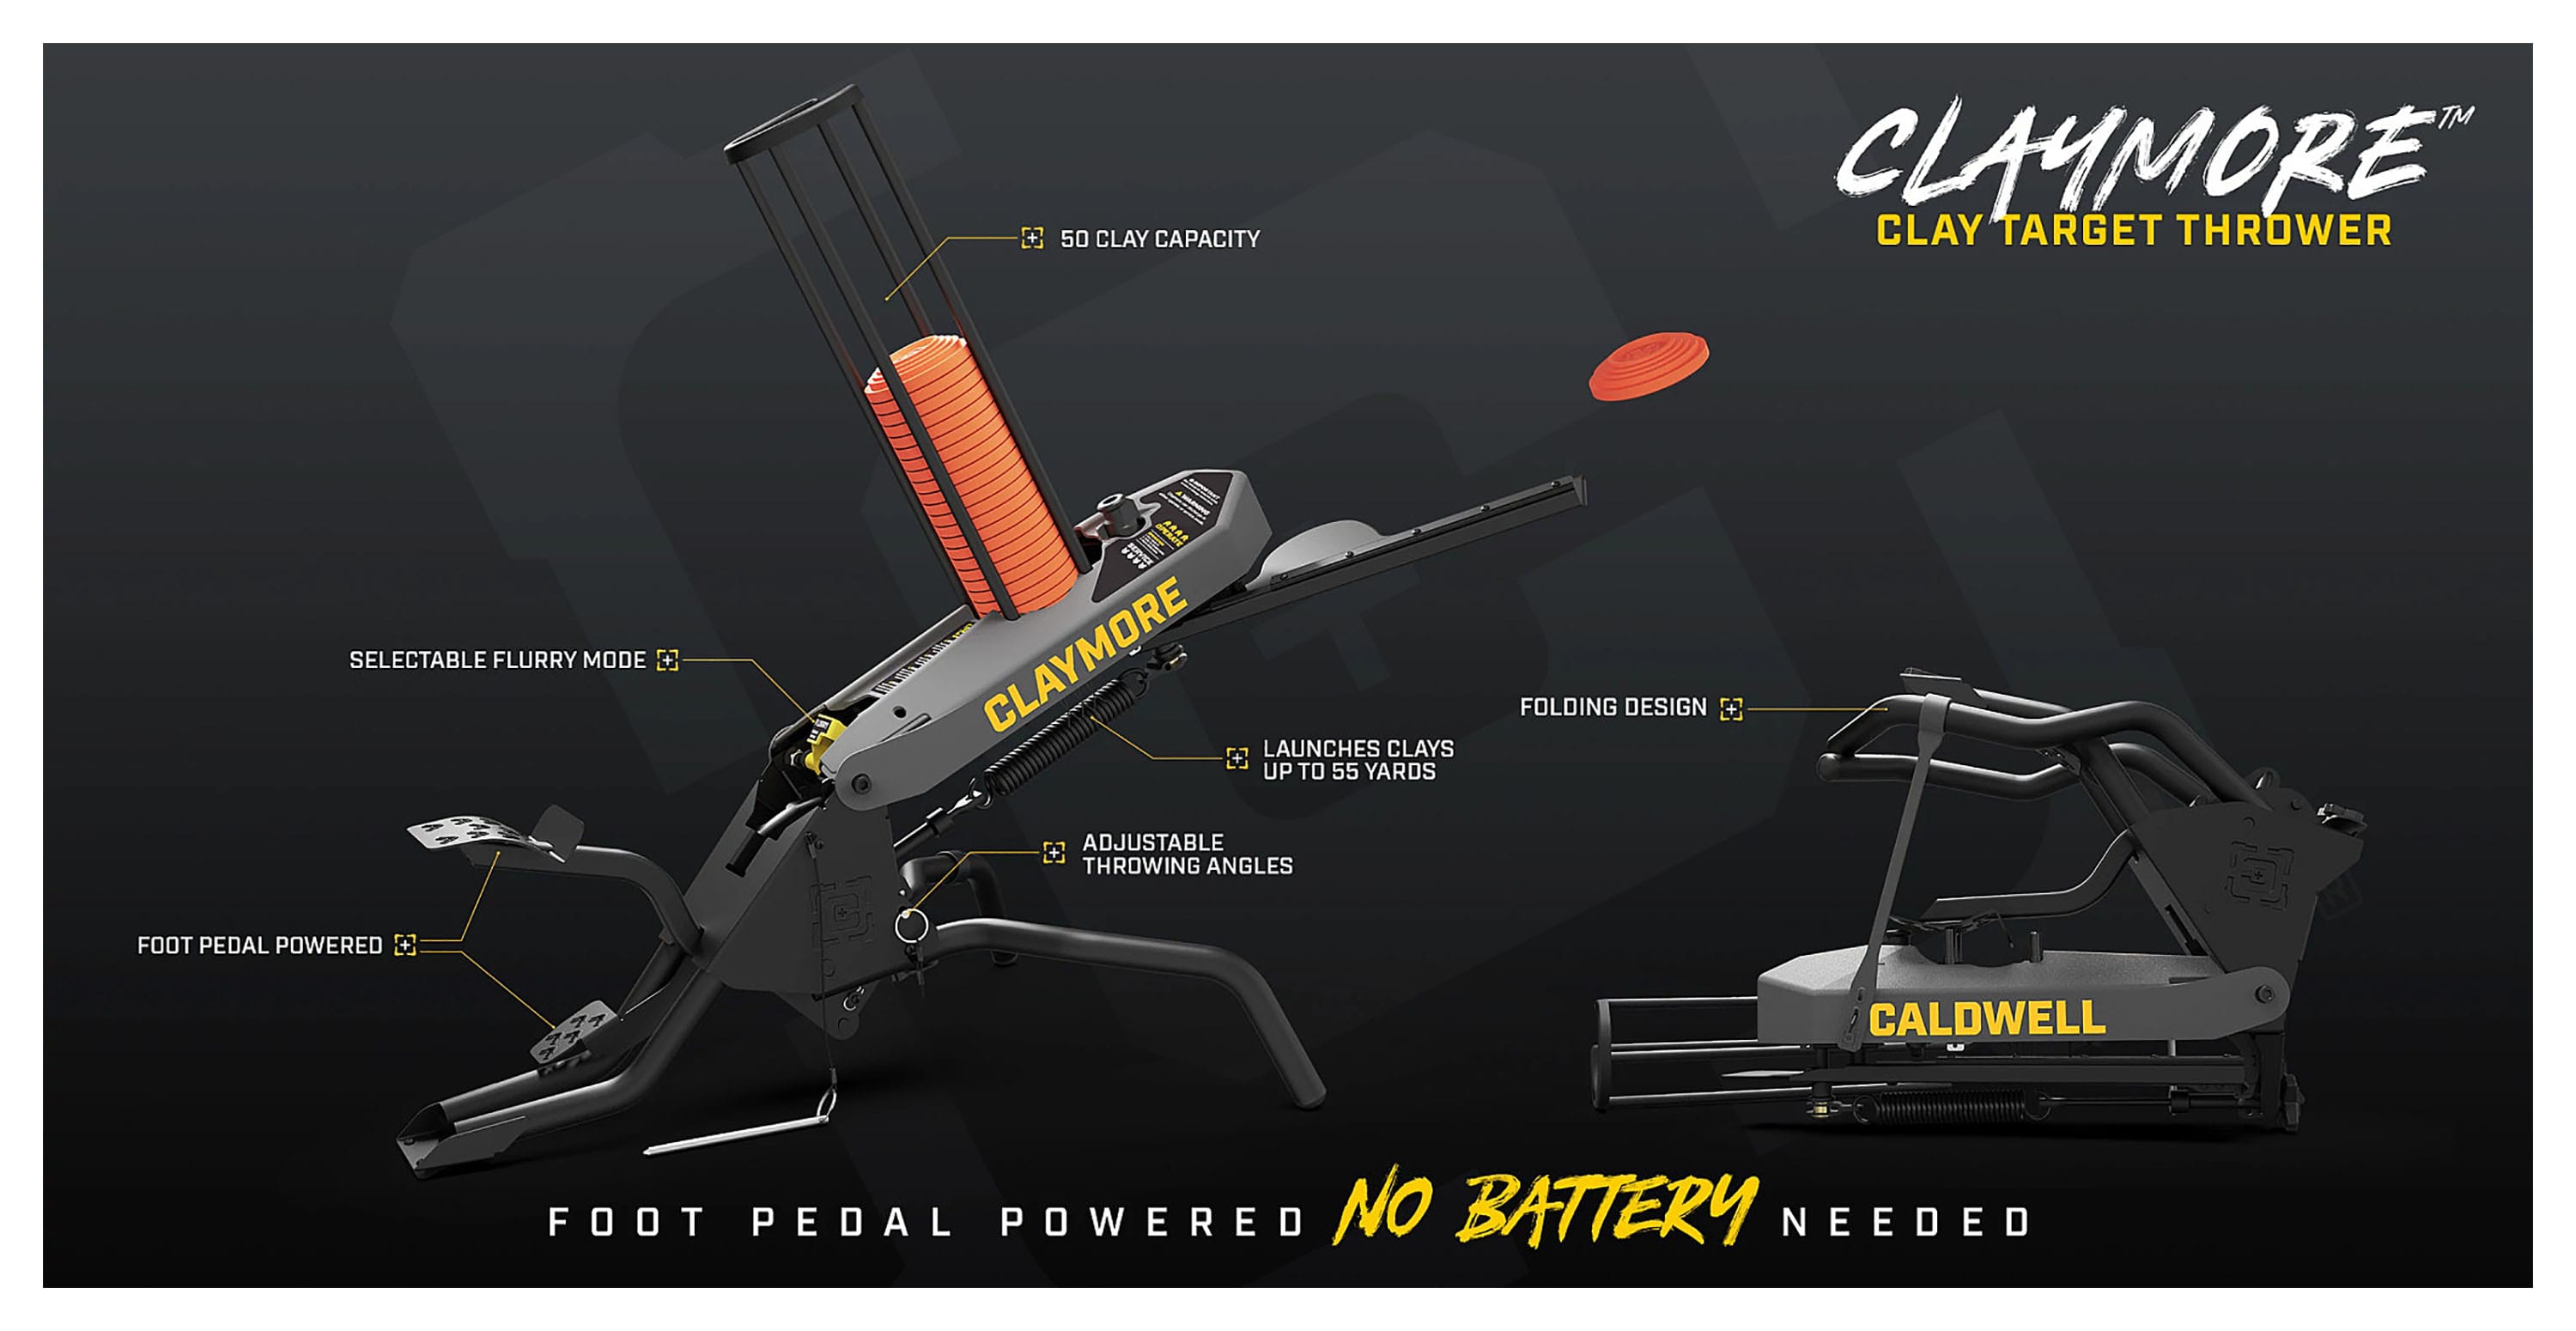 Caldwell® Claymore Target Thrower